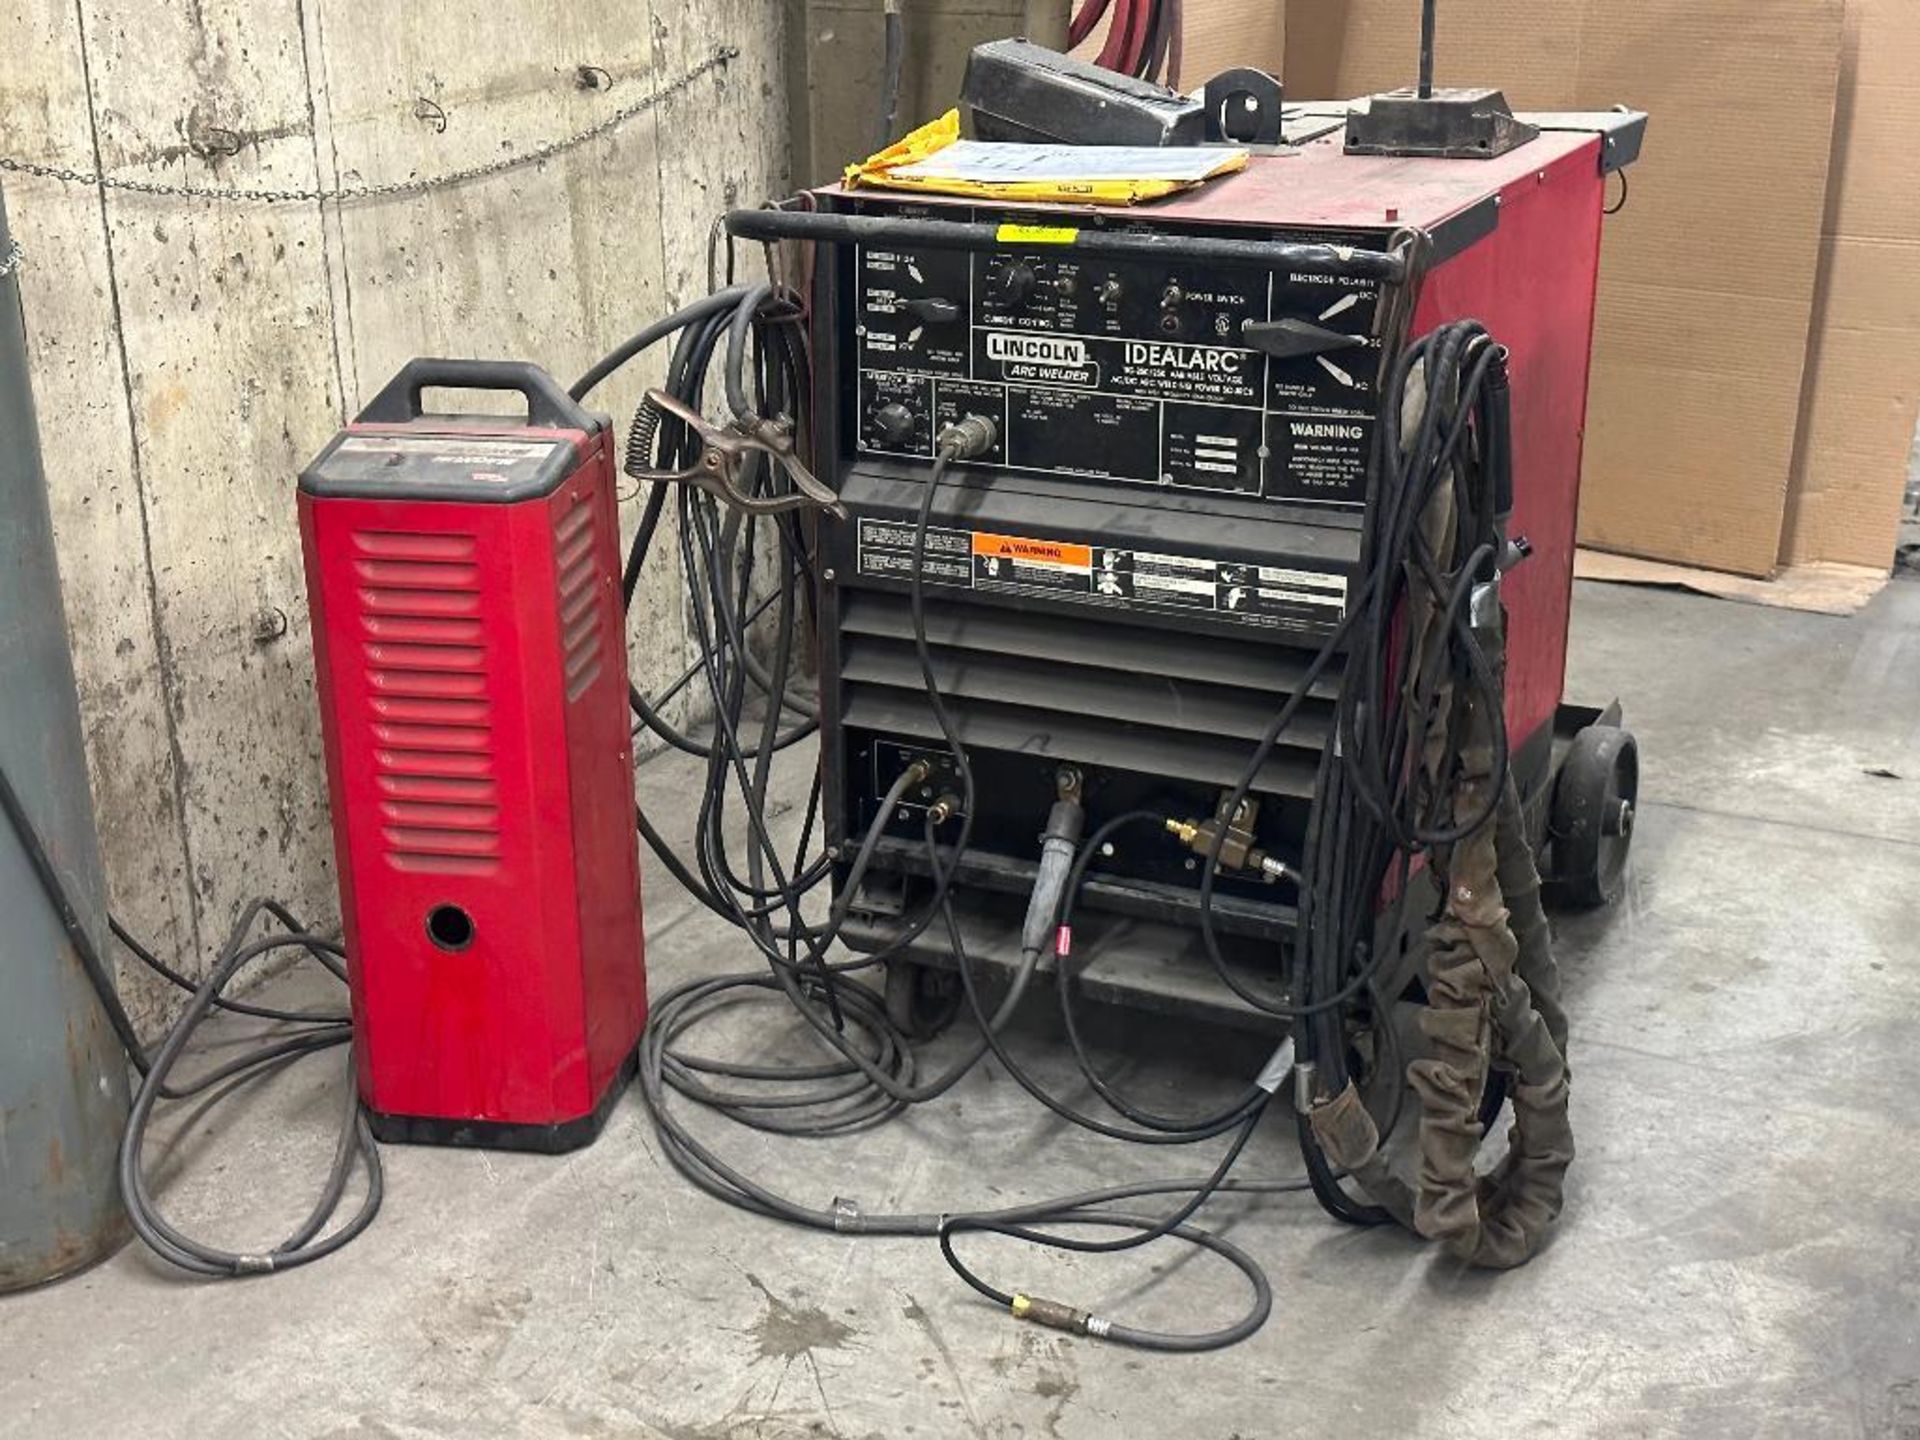 LINCOLN IDEALARC VARIABLE VOLTAGE ARC WELDER WITH LEADS AND ADDITIONAL FUEL TANK - Image 9 of 10